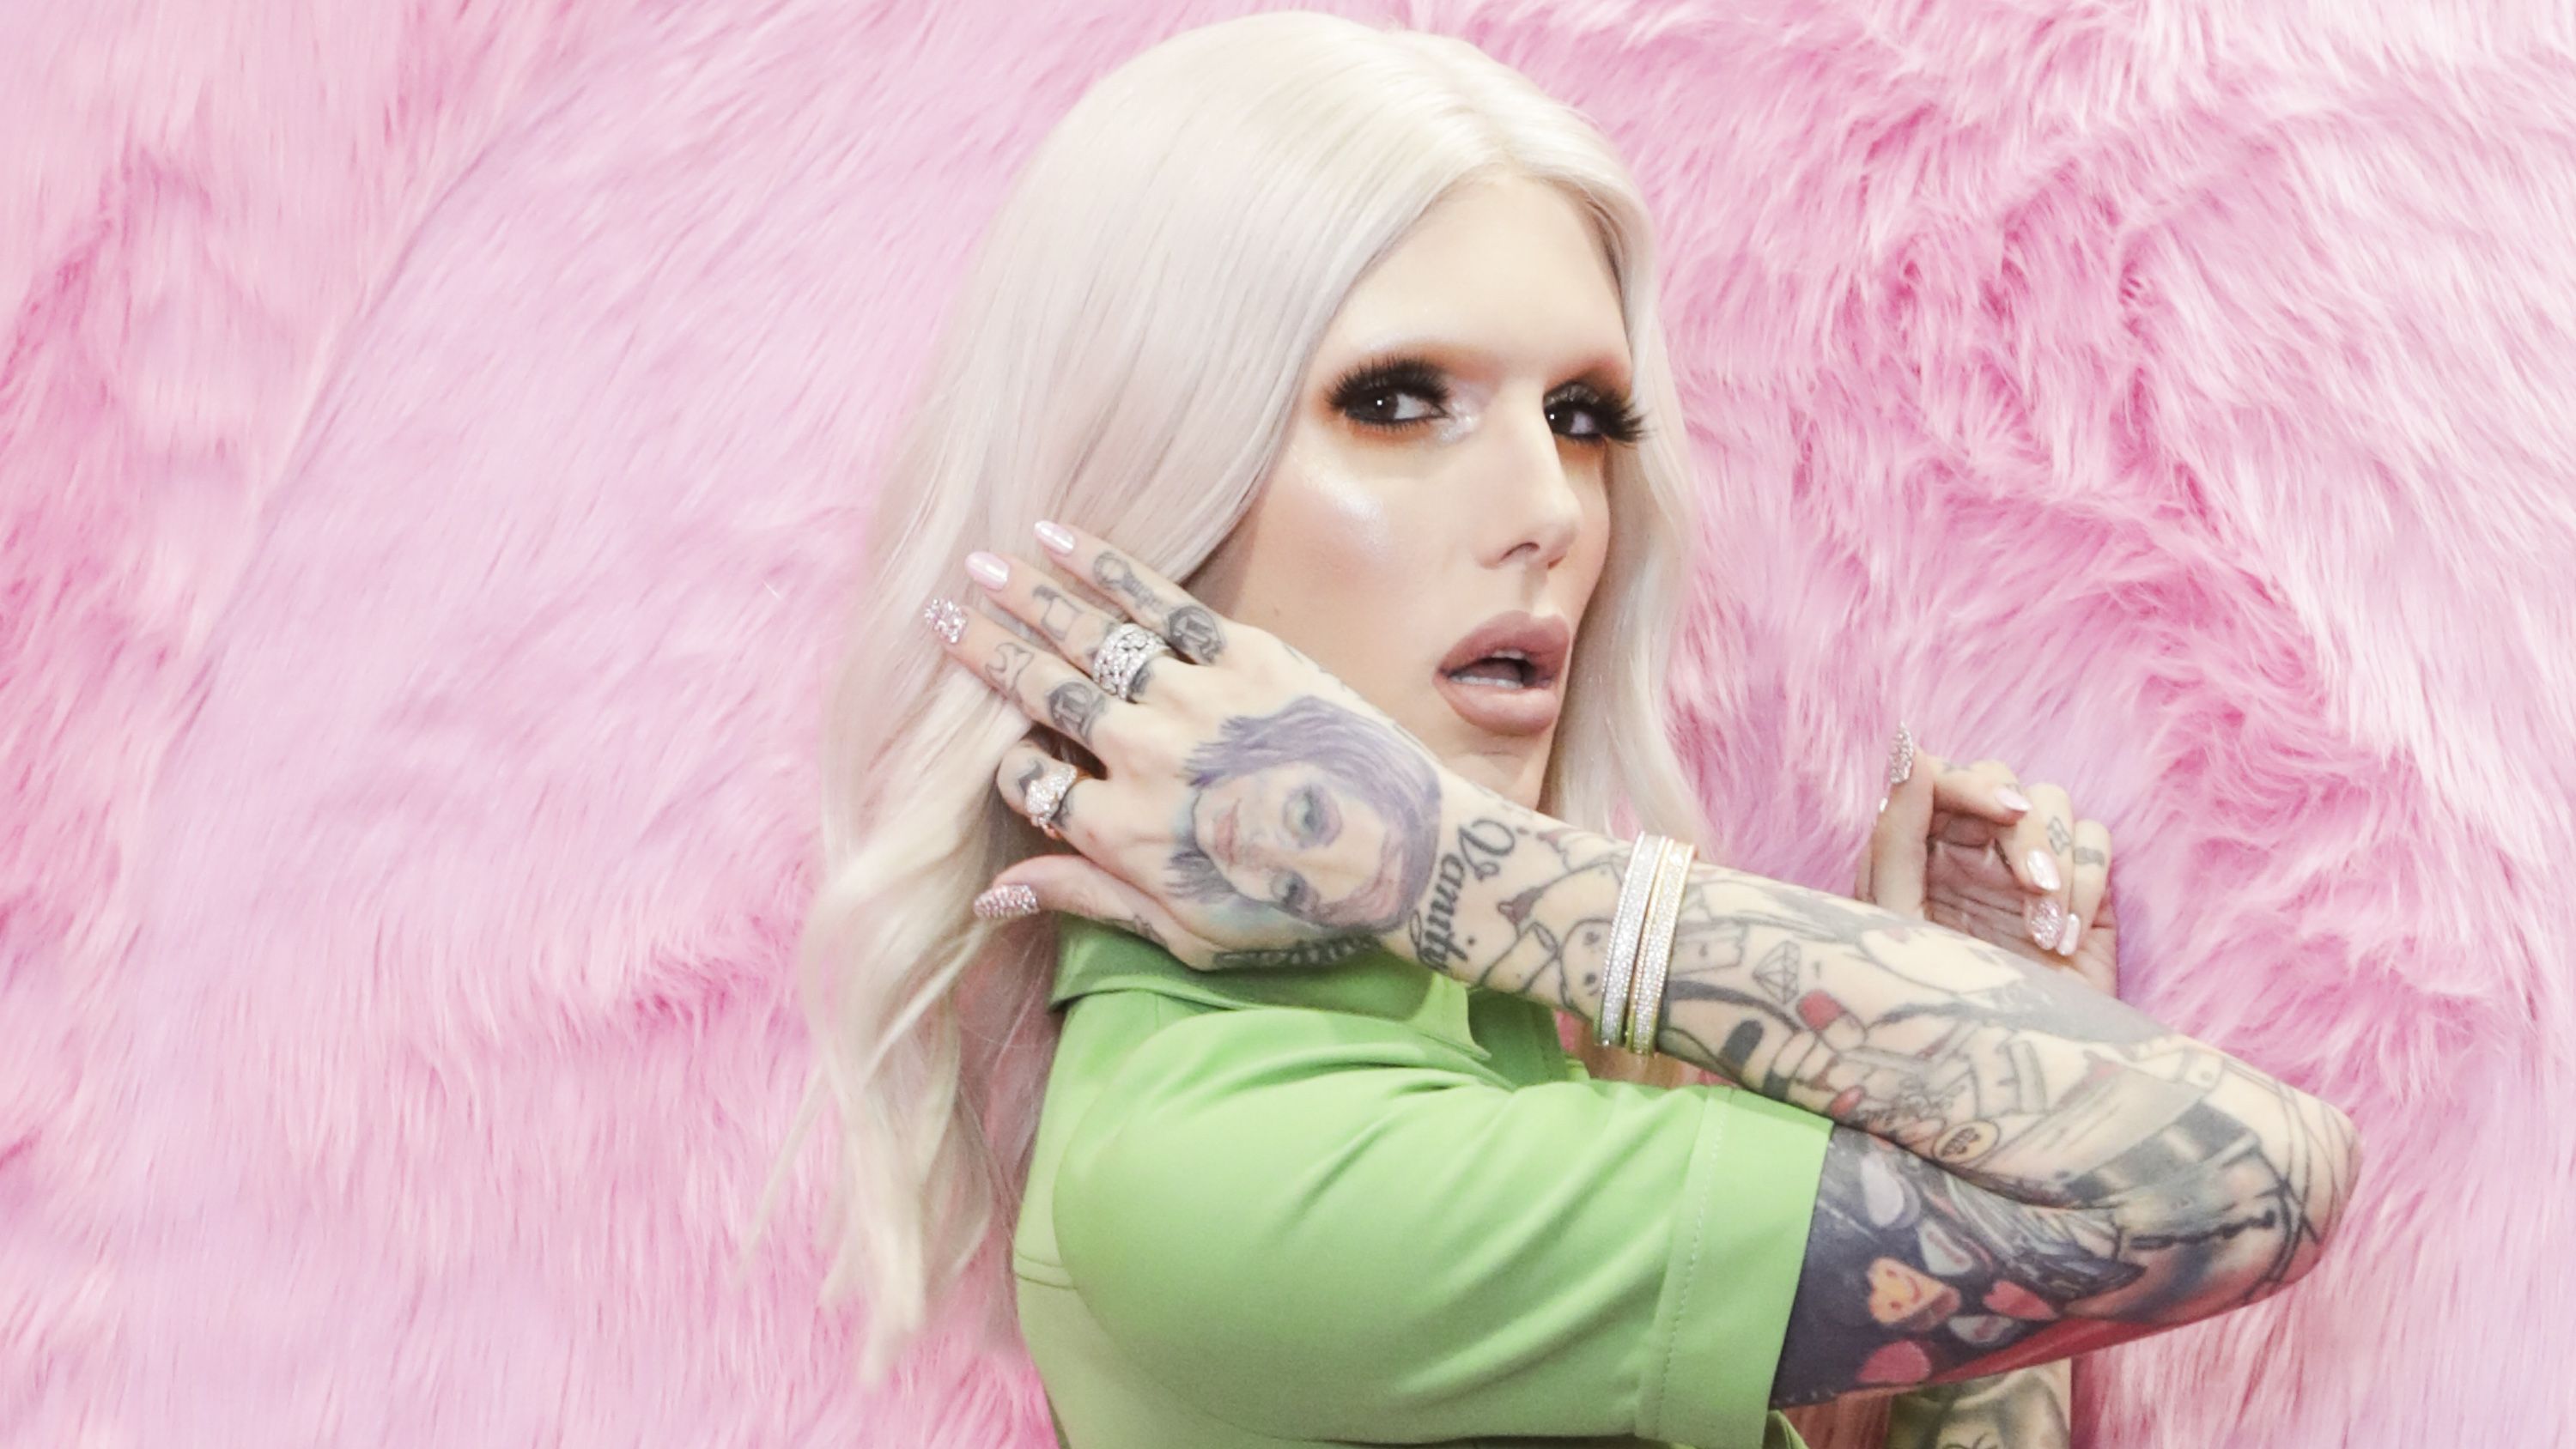 jeffree star before he was famous